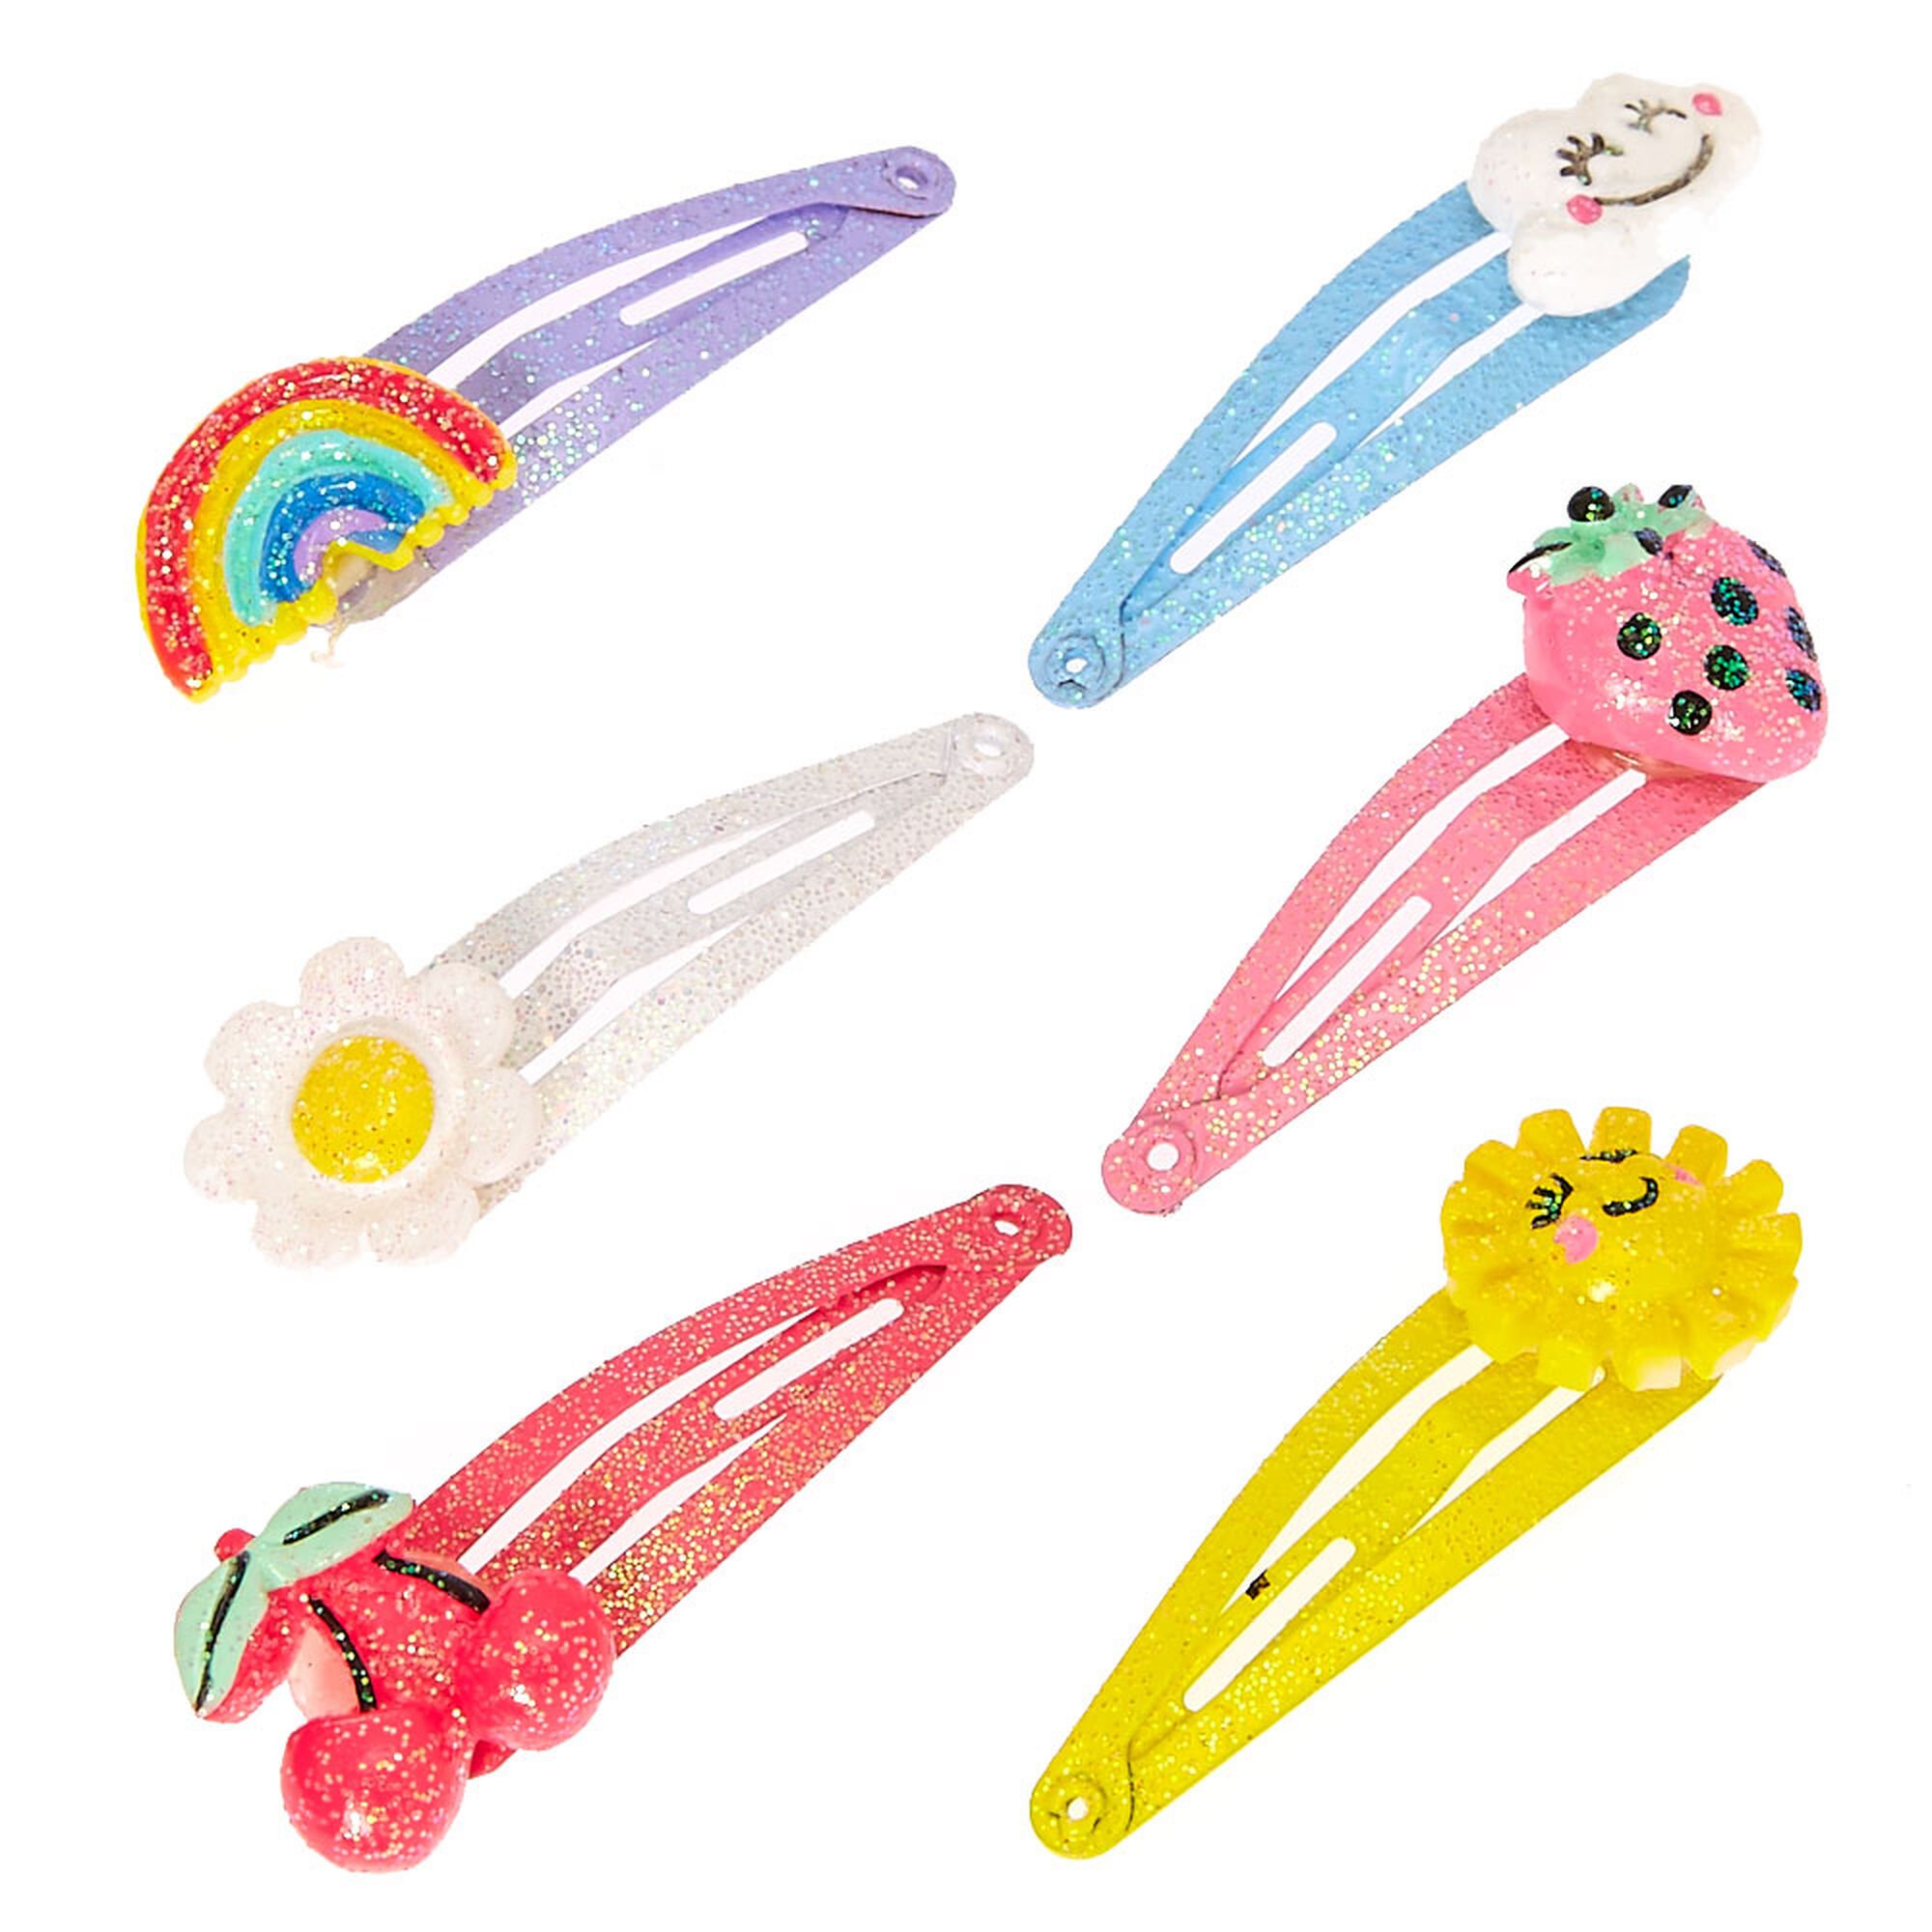 View Claires Club Spring Snap Hair Clips 6 Pack information